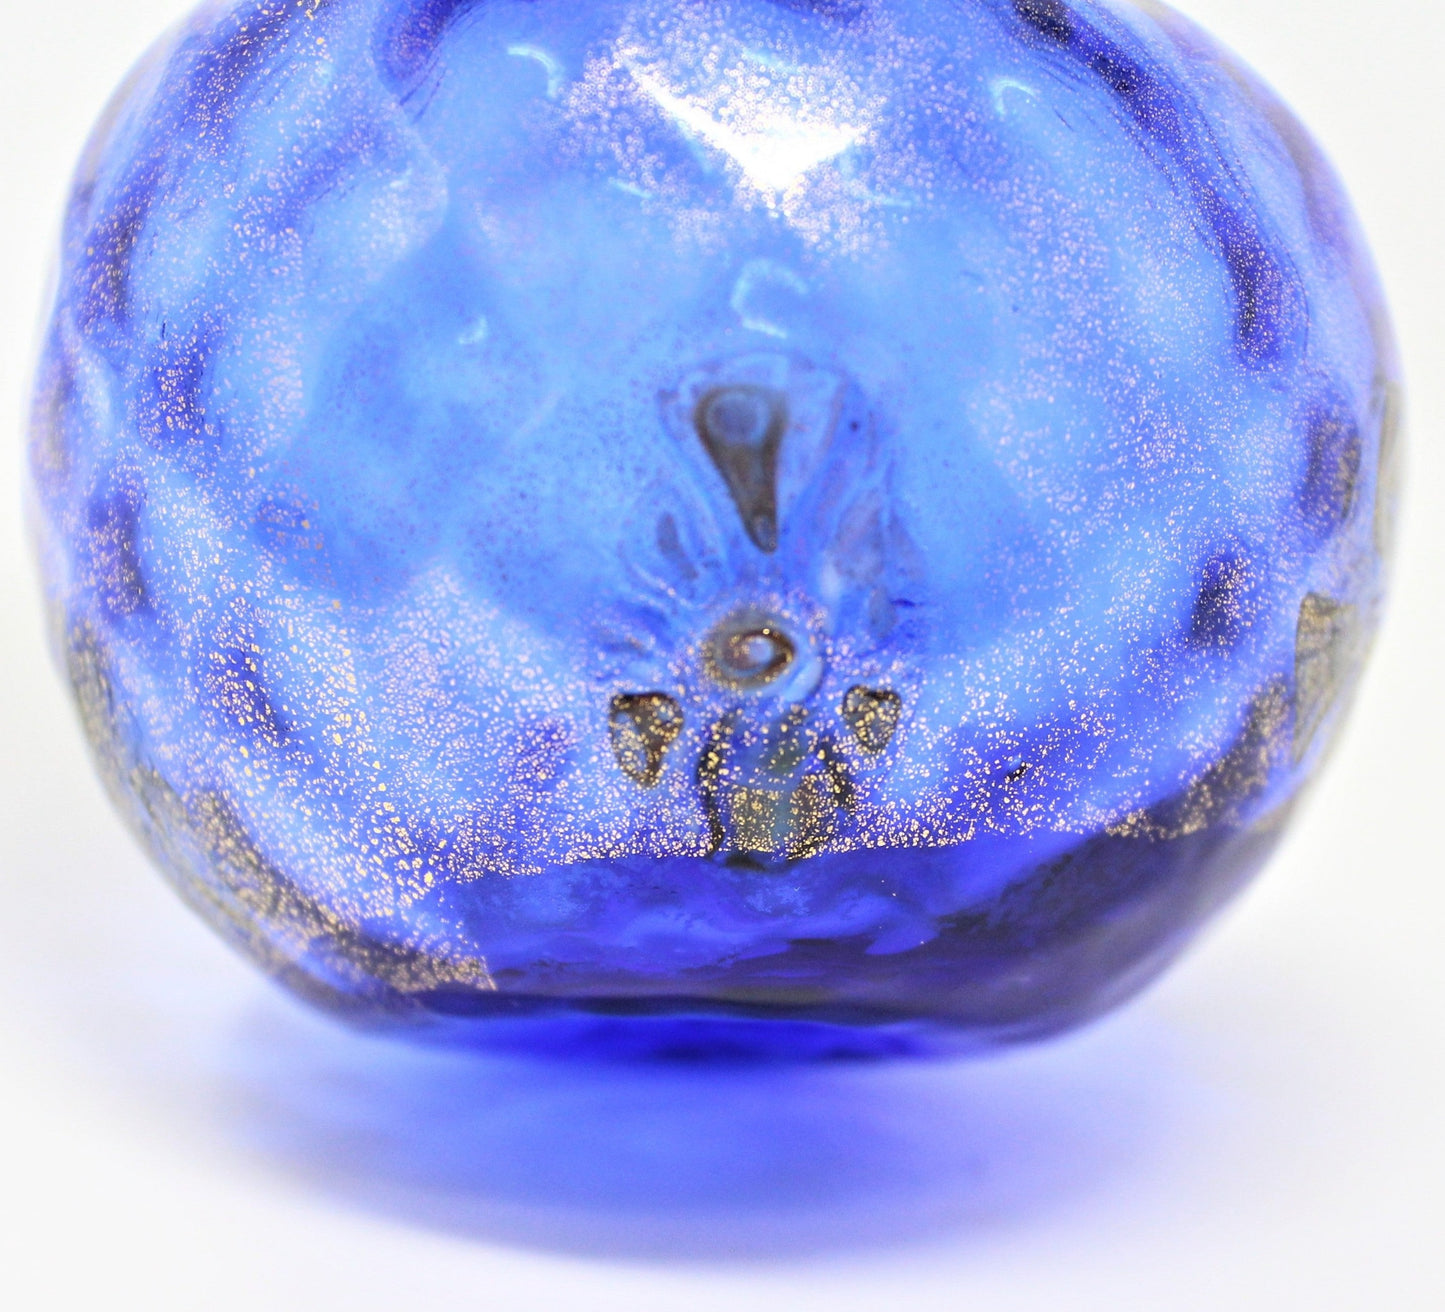 Bud Vase, Murano, Hand Blown, Cobalt Blue with Gold Leaf & Embossing, RARE, Vintage